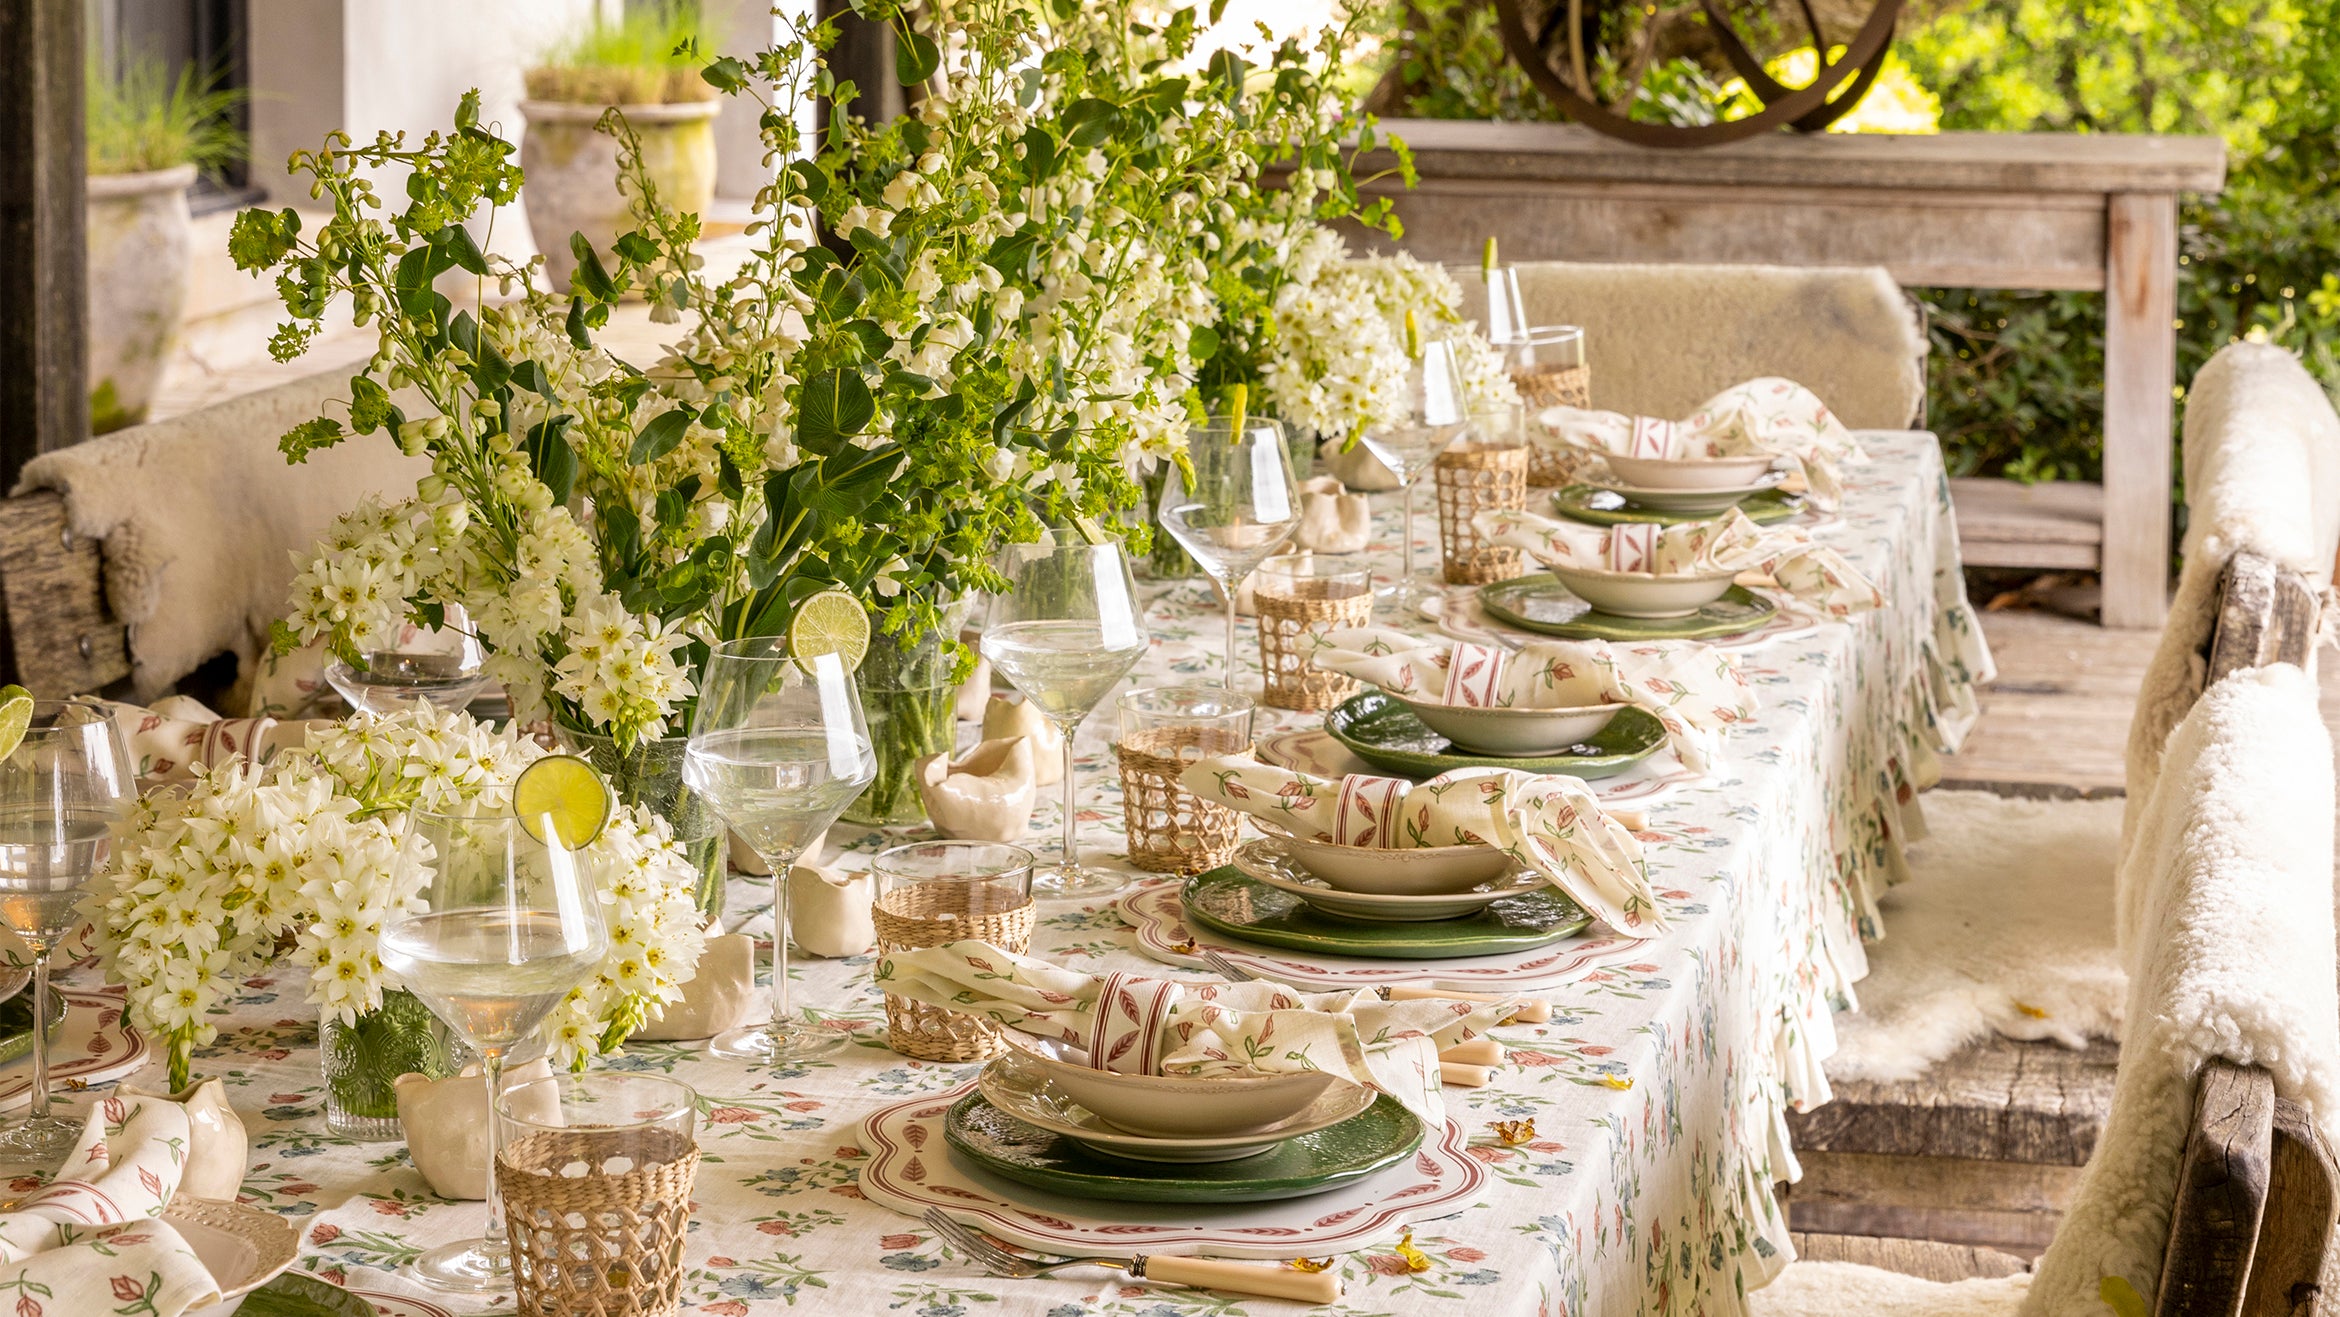 Hannah Sandling's Mother's Day tablescaping tips